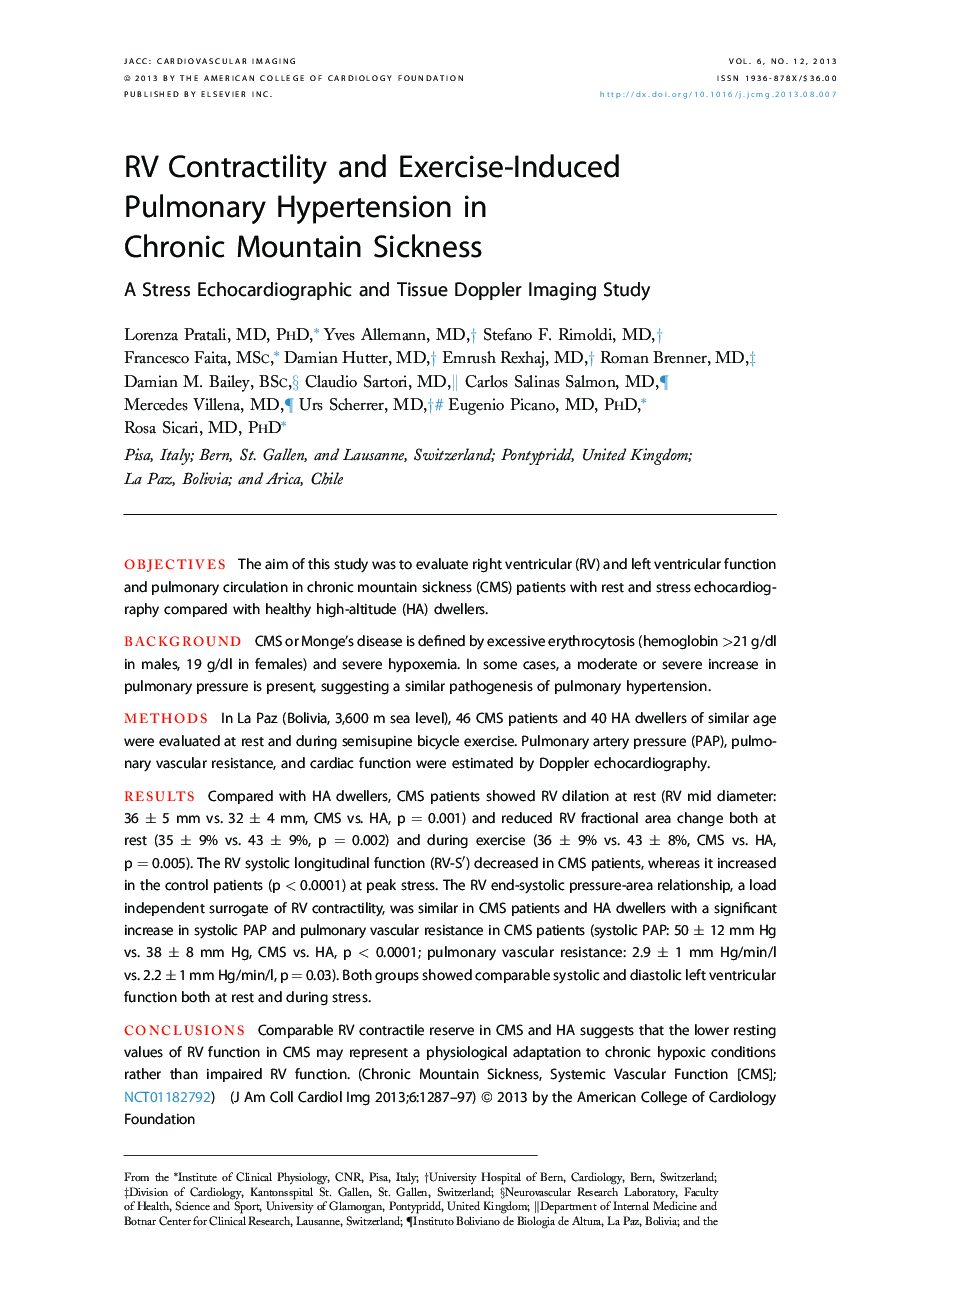 RV Contractility and Exercise-Induced Pulmonary Hypertension in Chronic Mountain Sickness : A Stress Echocardiographic and Tissue Doppler Imaging Study